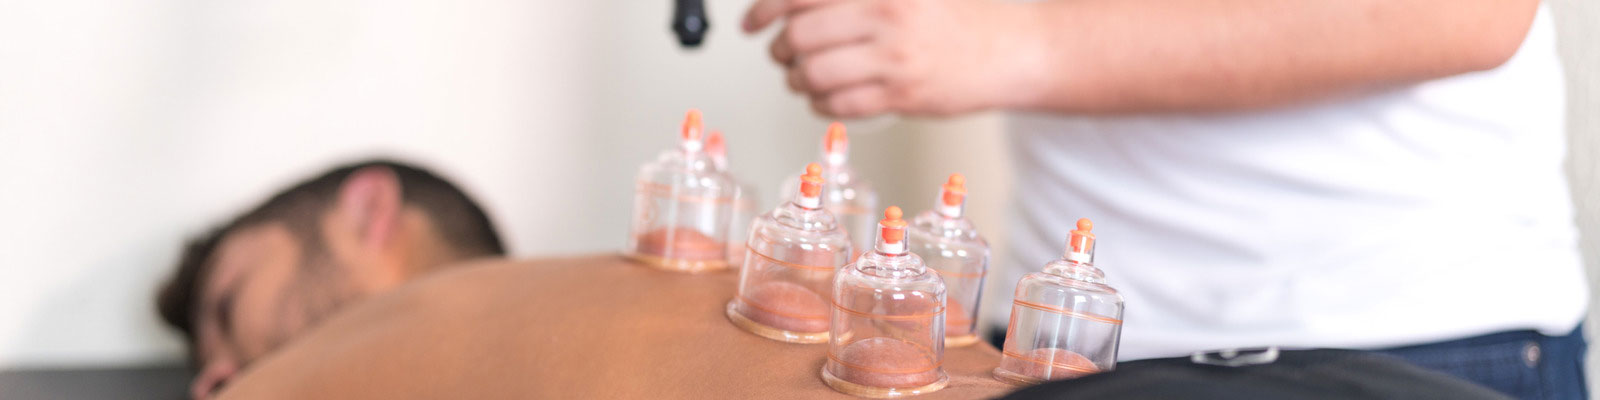 Cupping Therapy Treatment in Gurgaon